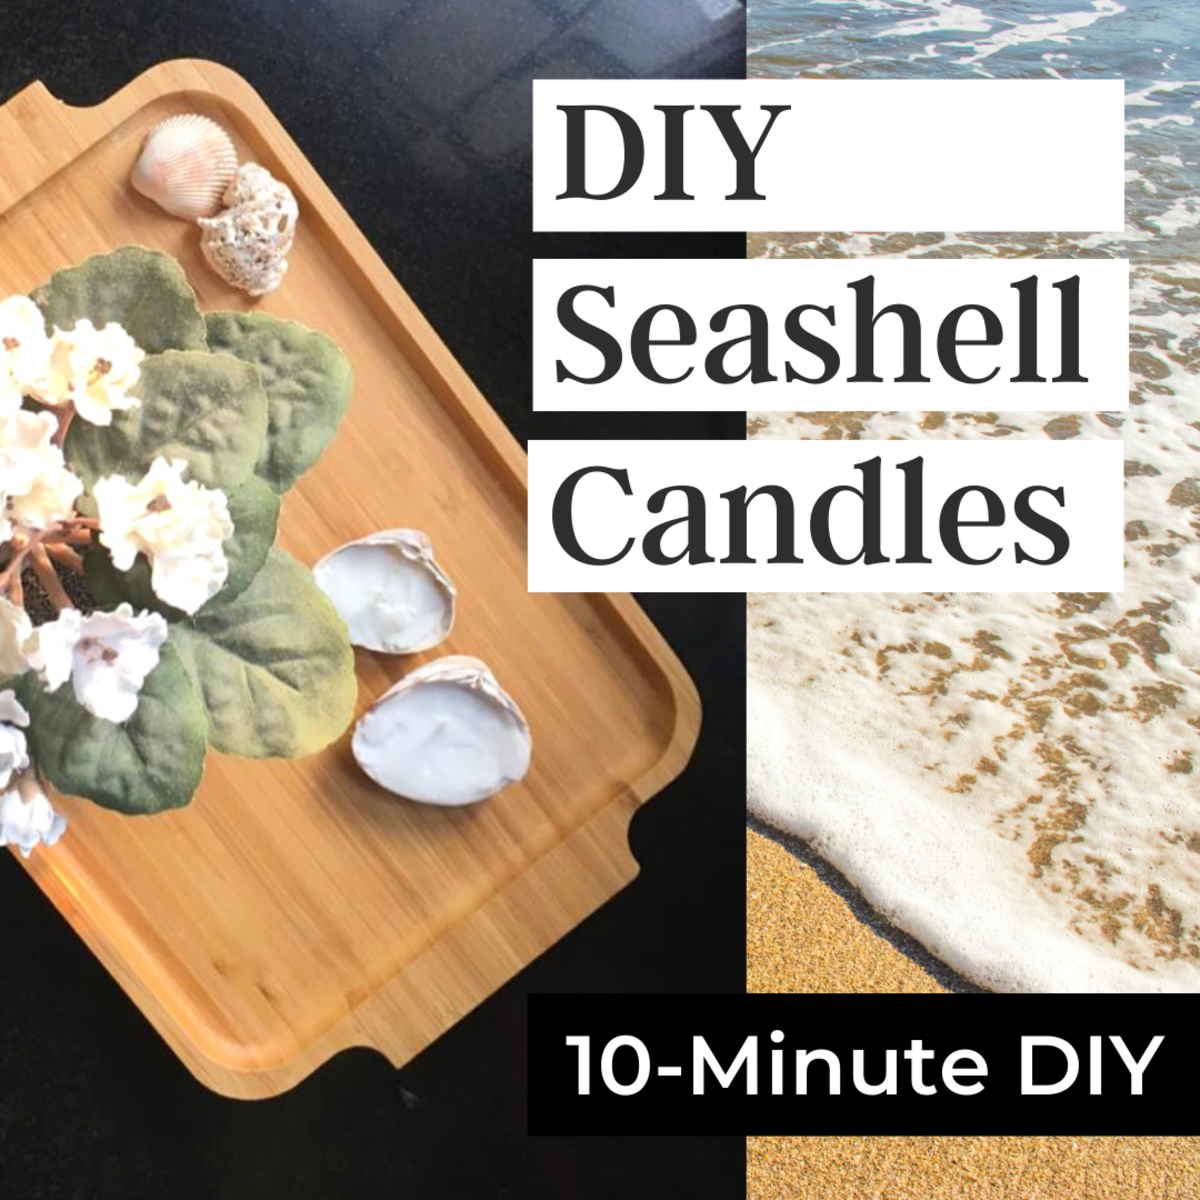 how-to-make-seashell-candles-10-minute-diy-project